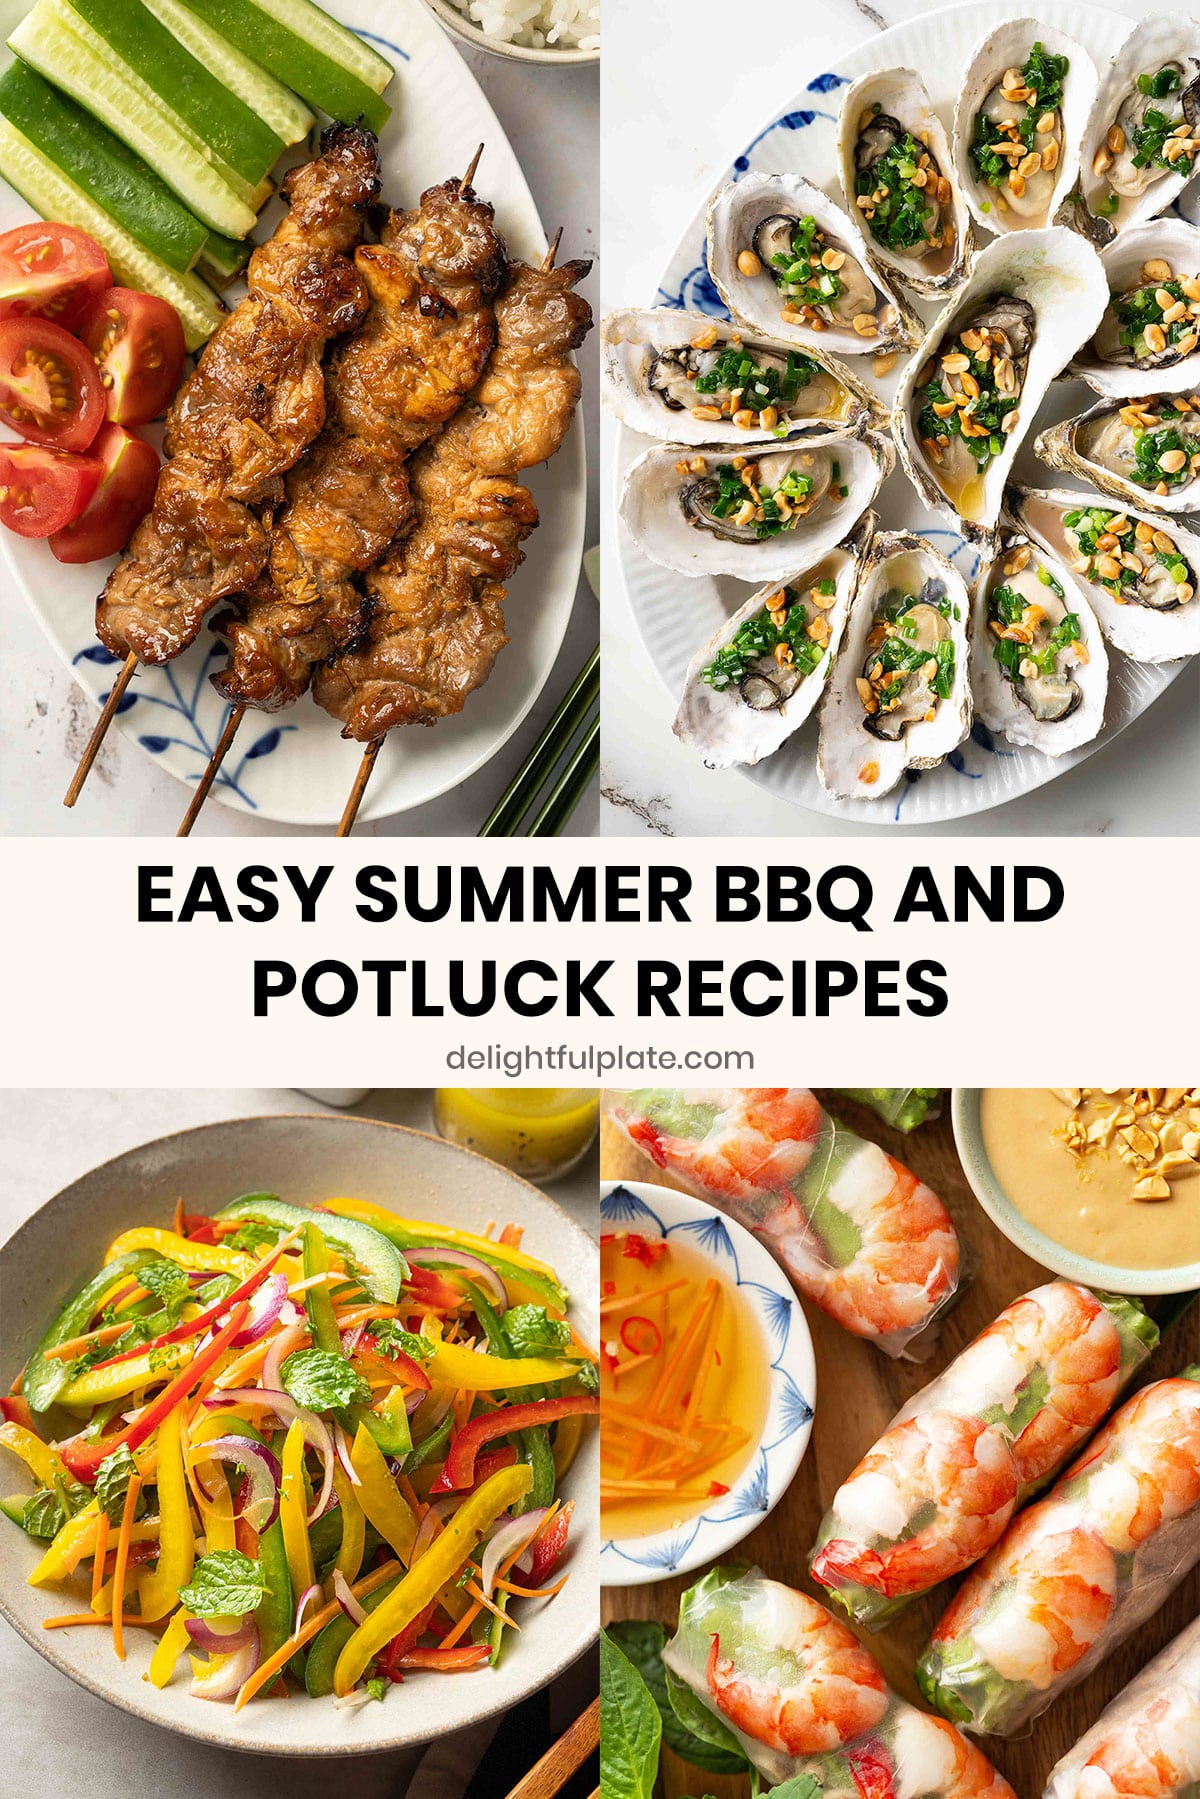 a collage of summer BBQ and potluck recipes